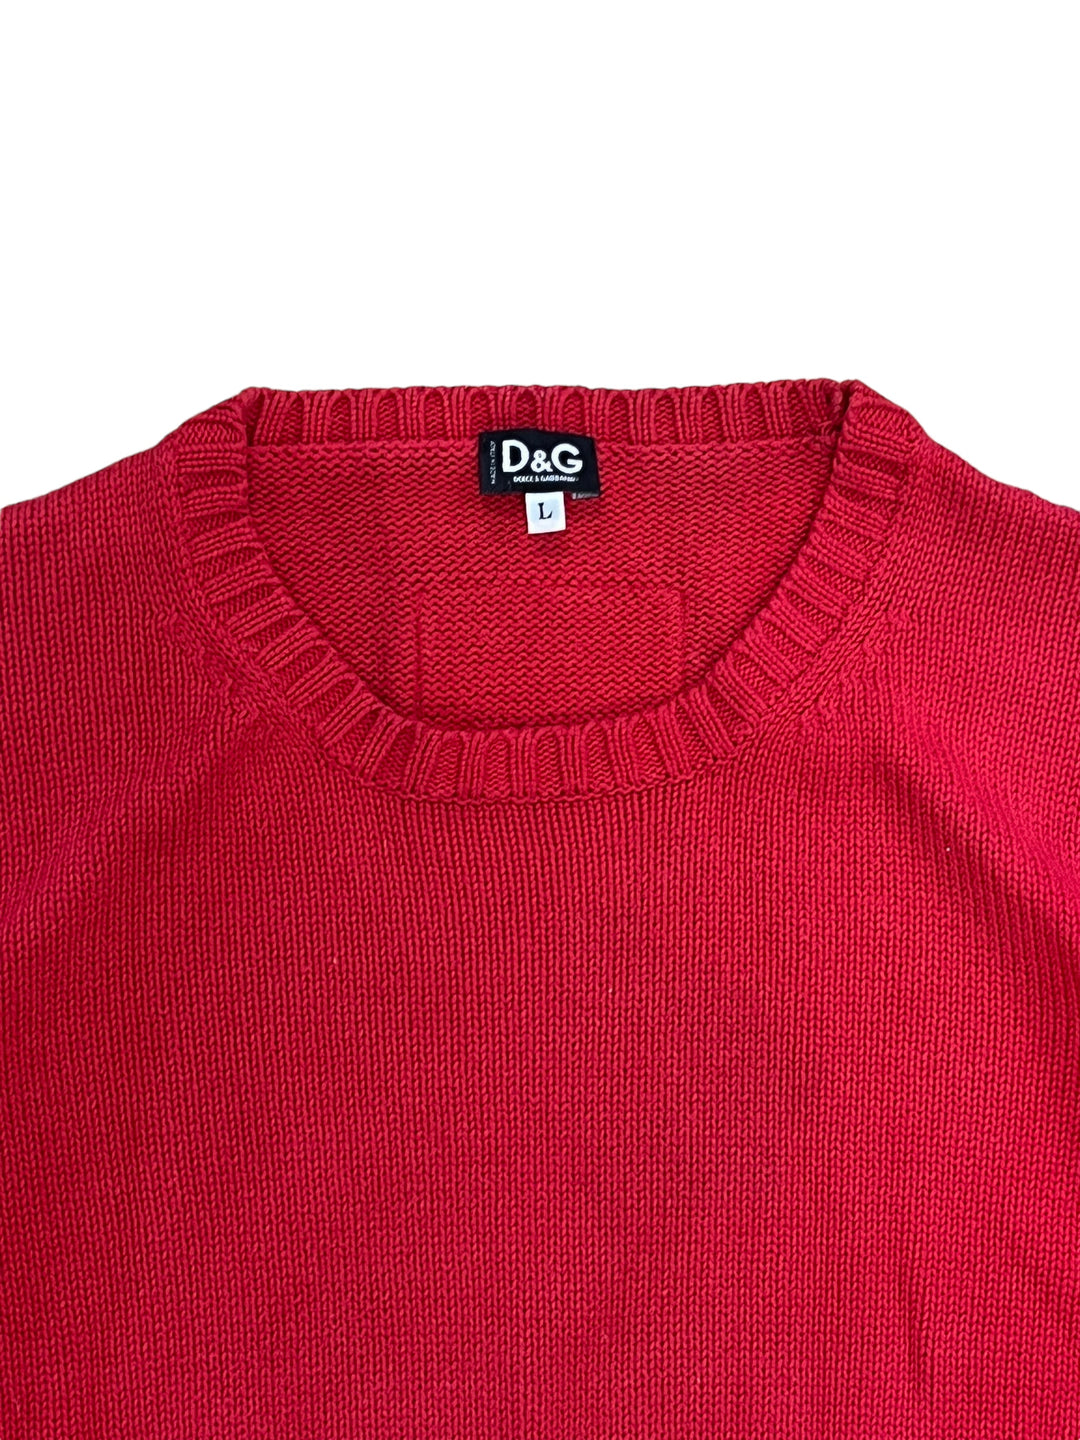 Dolce & Gabbana Vintage Red Sweater Women’s Large